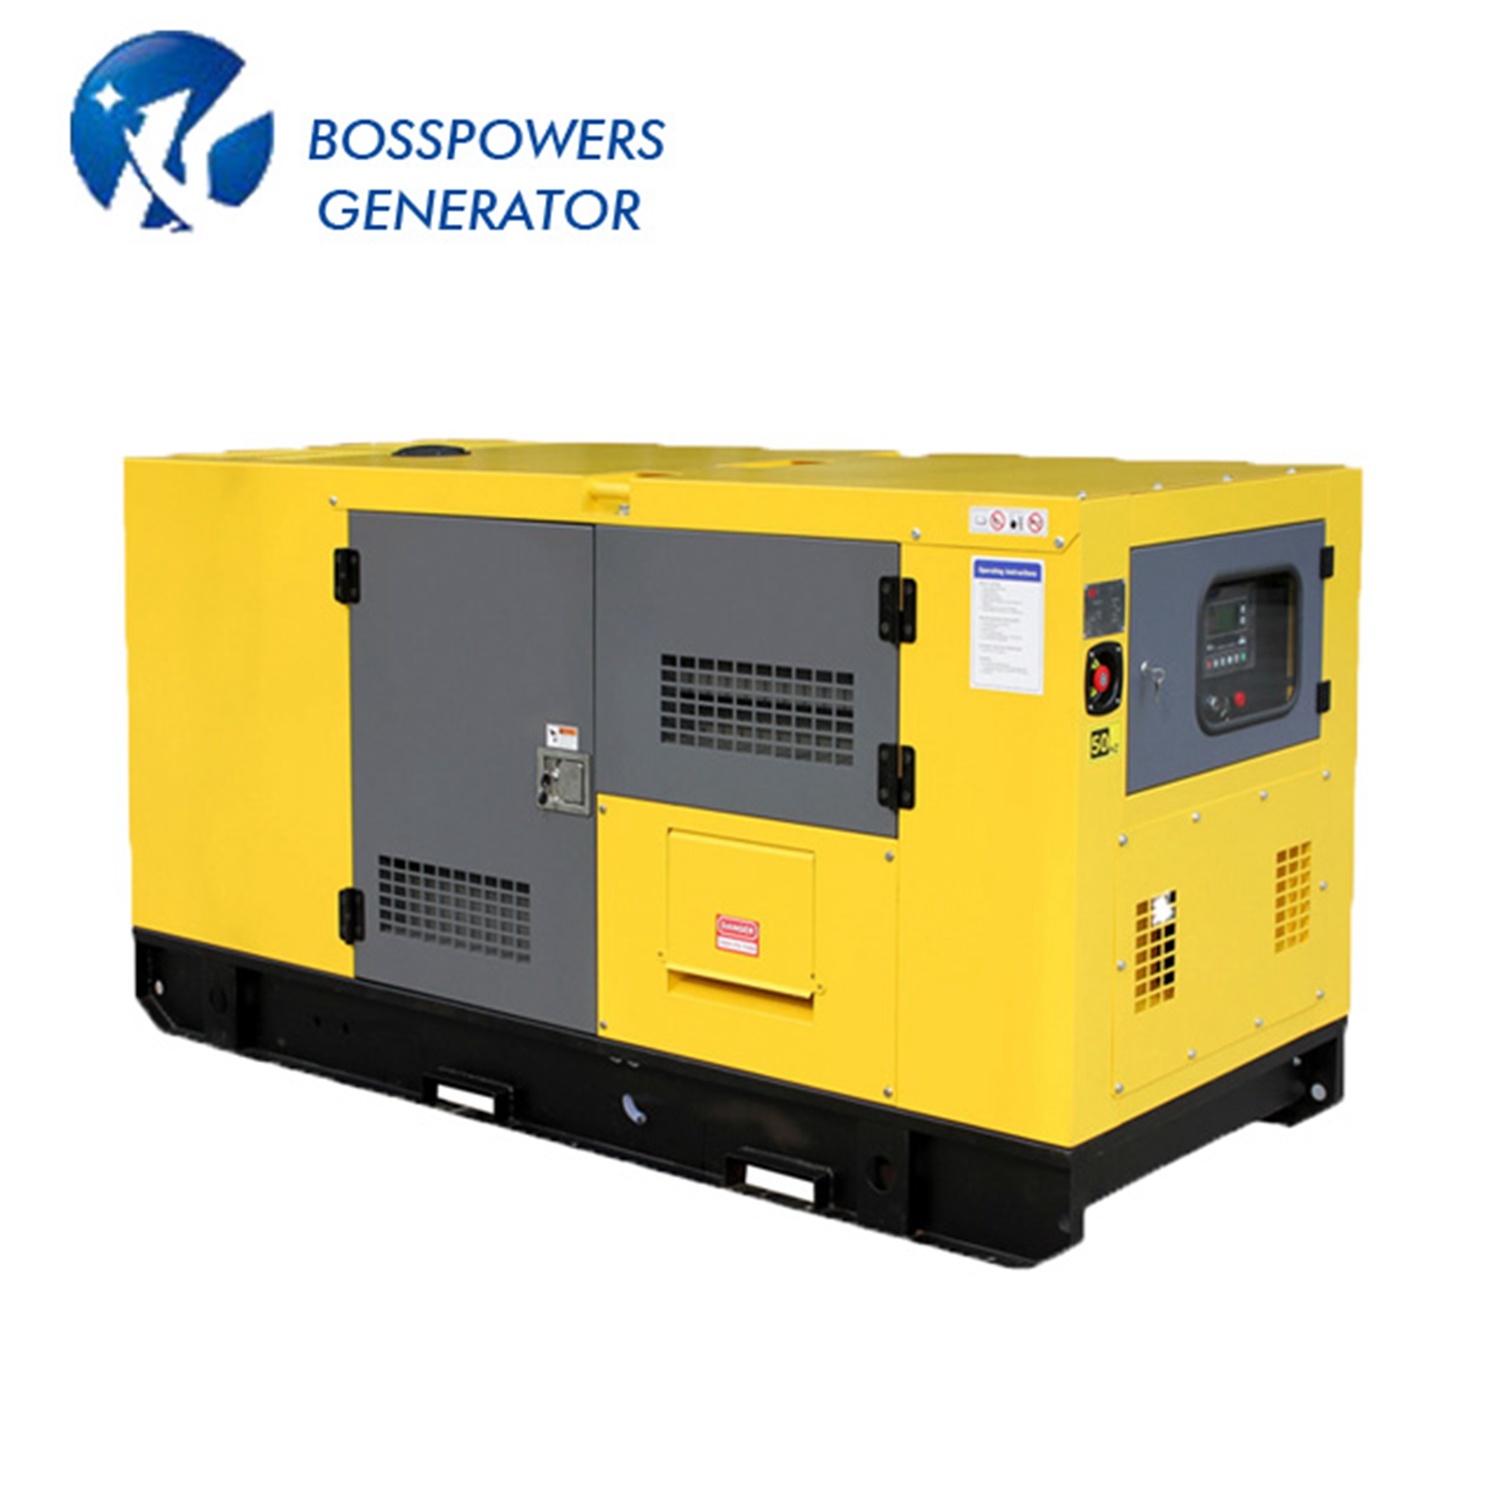 450kVA Diesel Generator AC Output Soundproof Canopy Powered by Bf8m1015c-La-G2